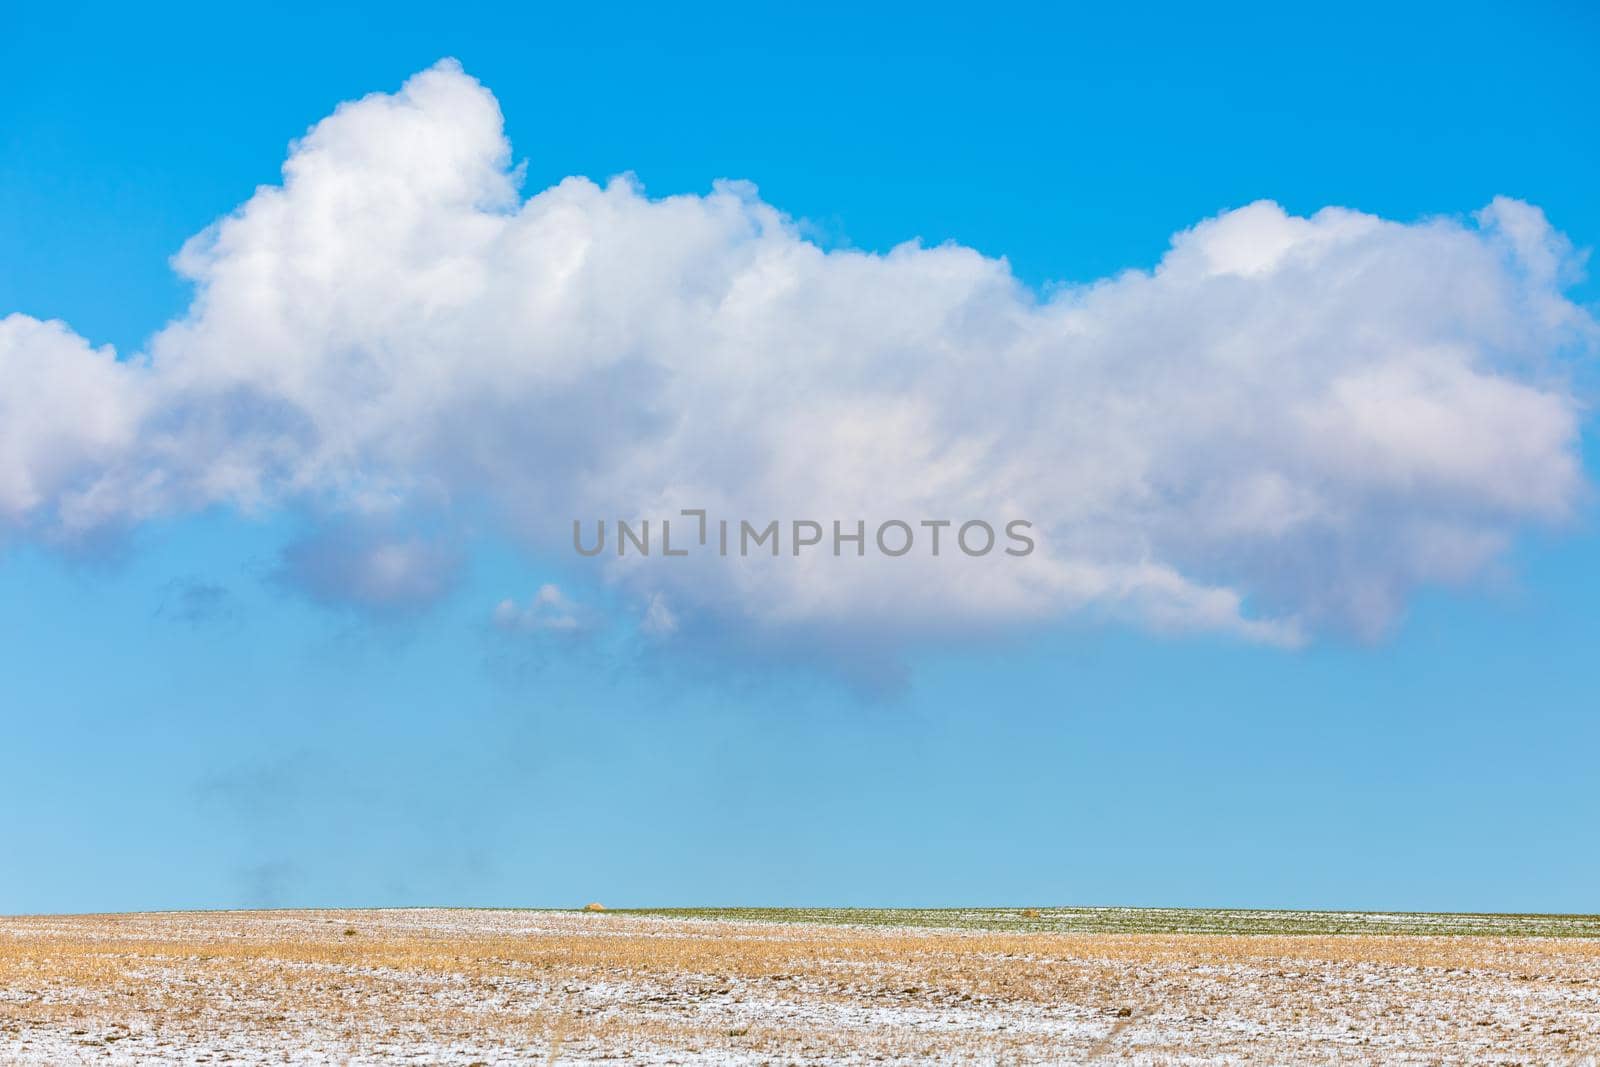 Simple winter background with beautiful lines from skier and big clouds on horizon with blue sky